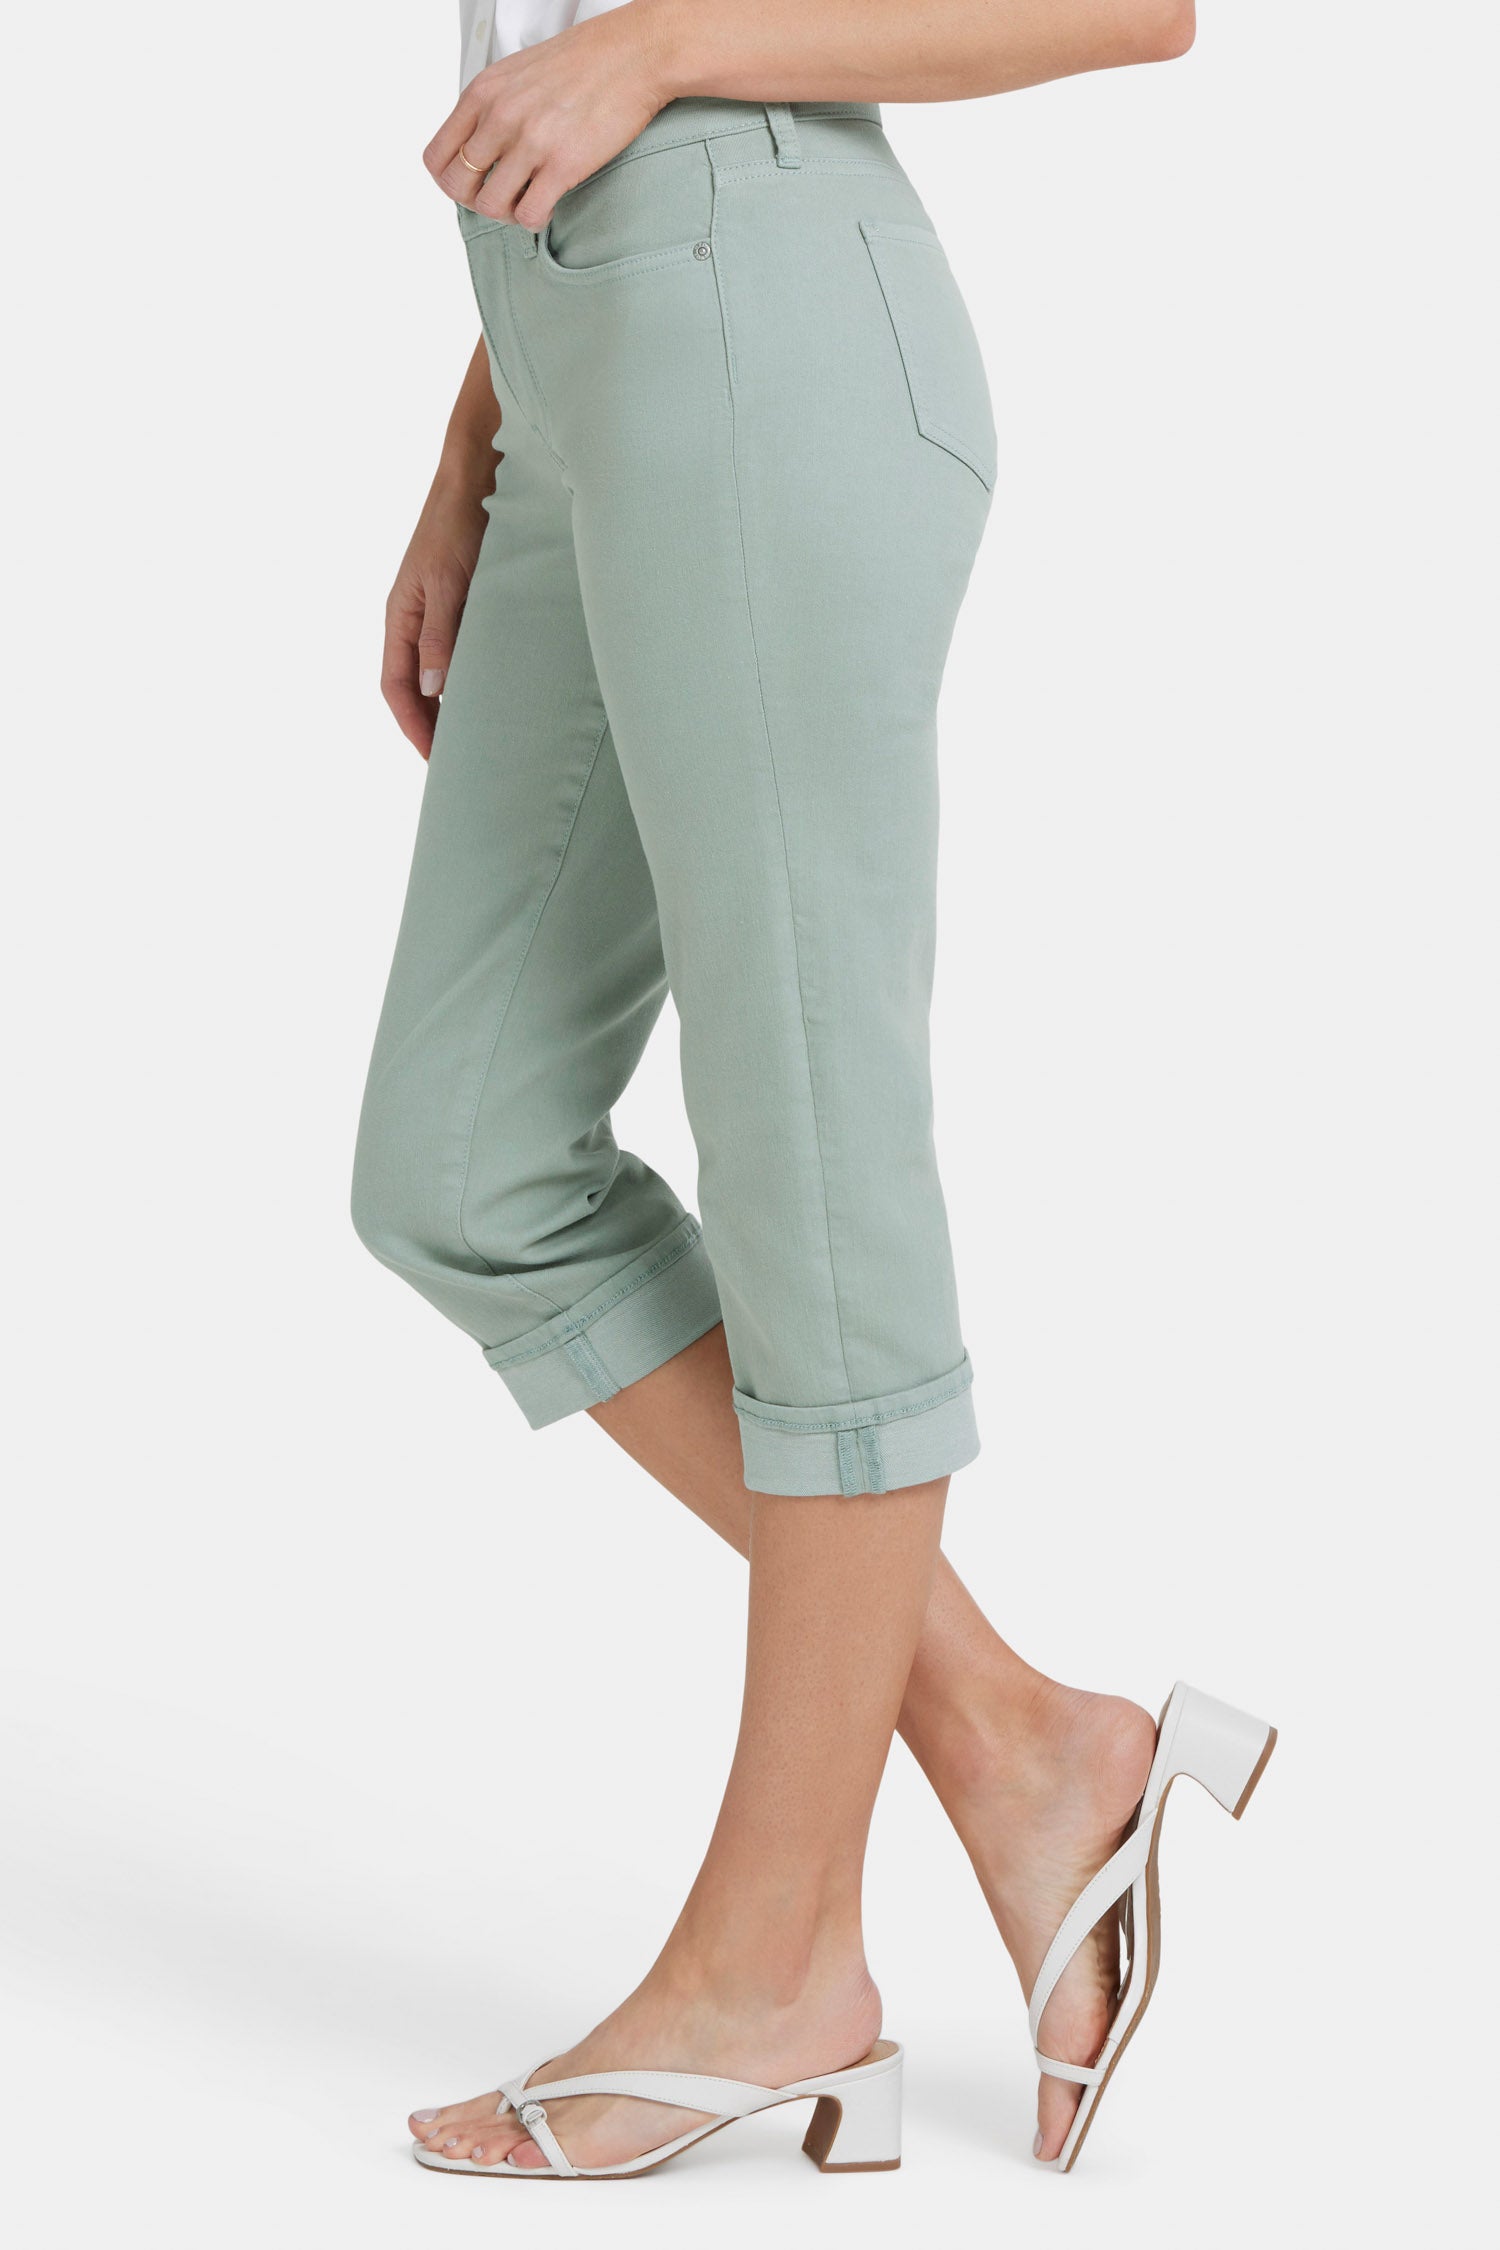 Marilyn Straight Crop Jeans - Lily Pad